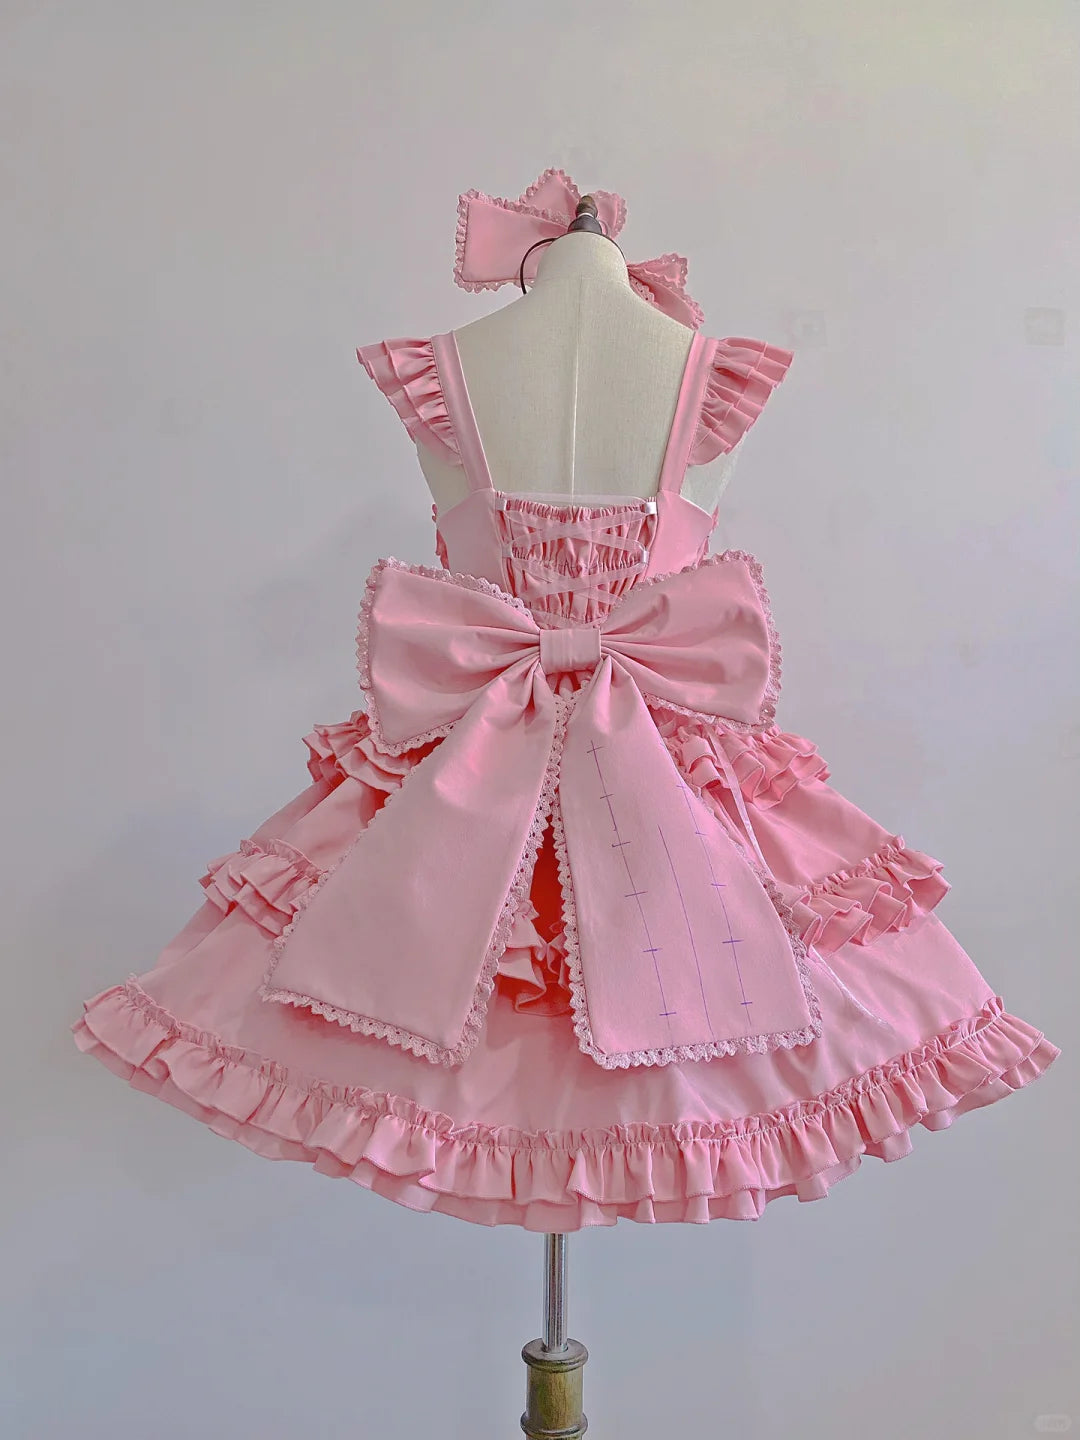 Hachimicos Pink Sleeveless Gothic Lolita Dress Cosplay Costume From Hachimicos